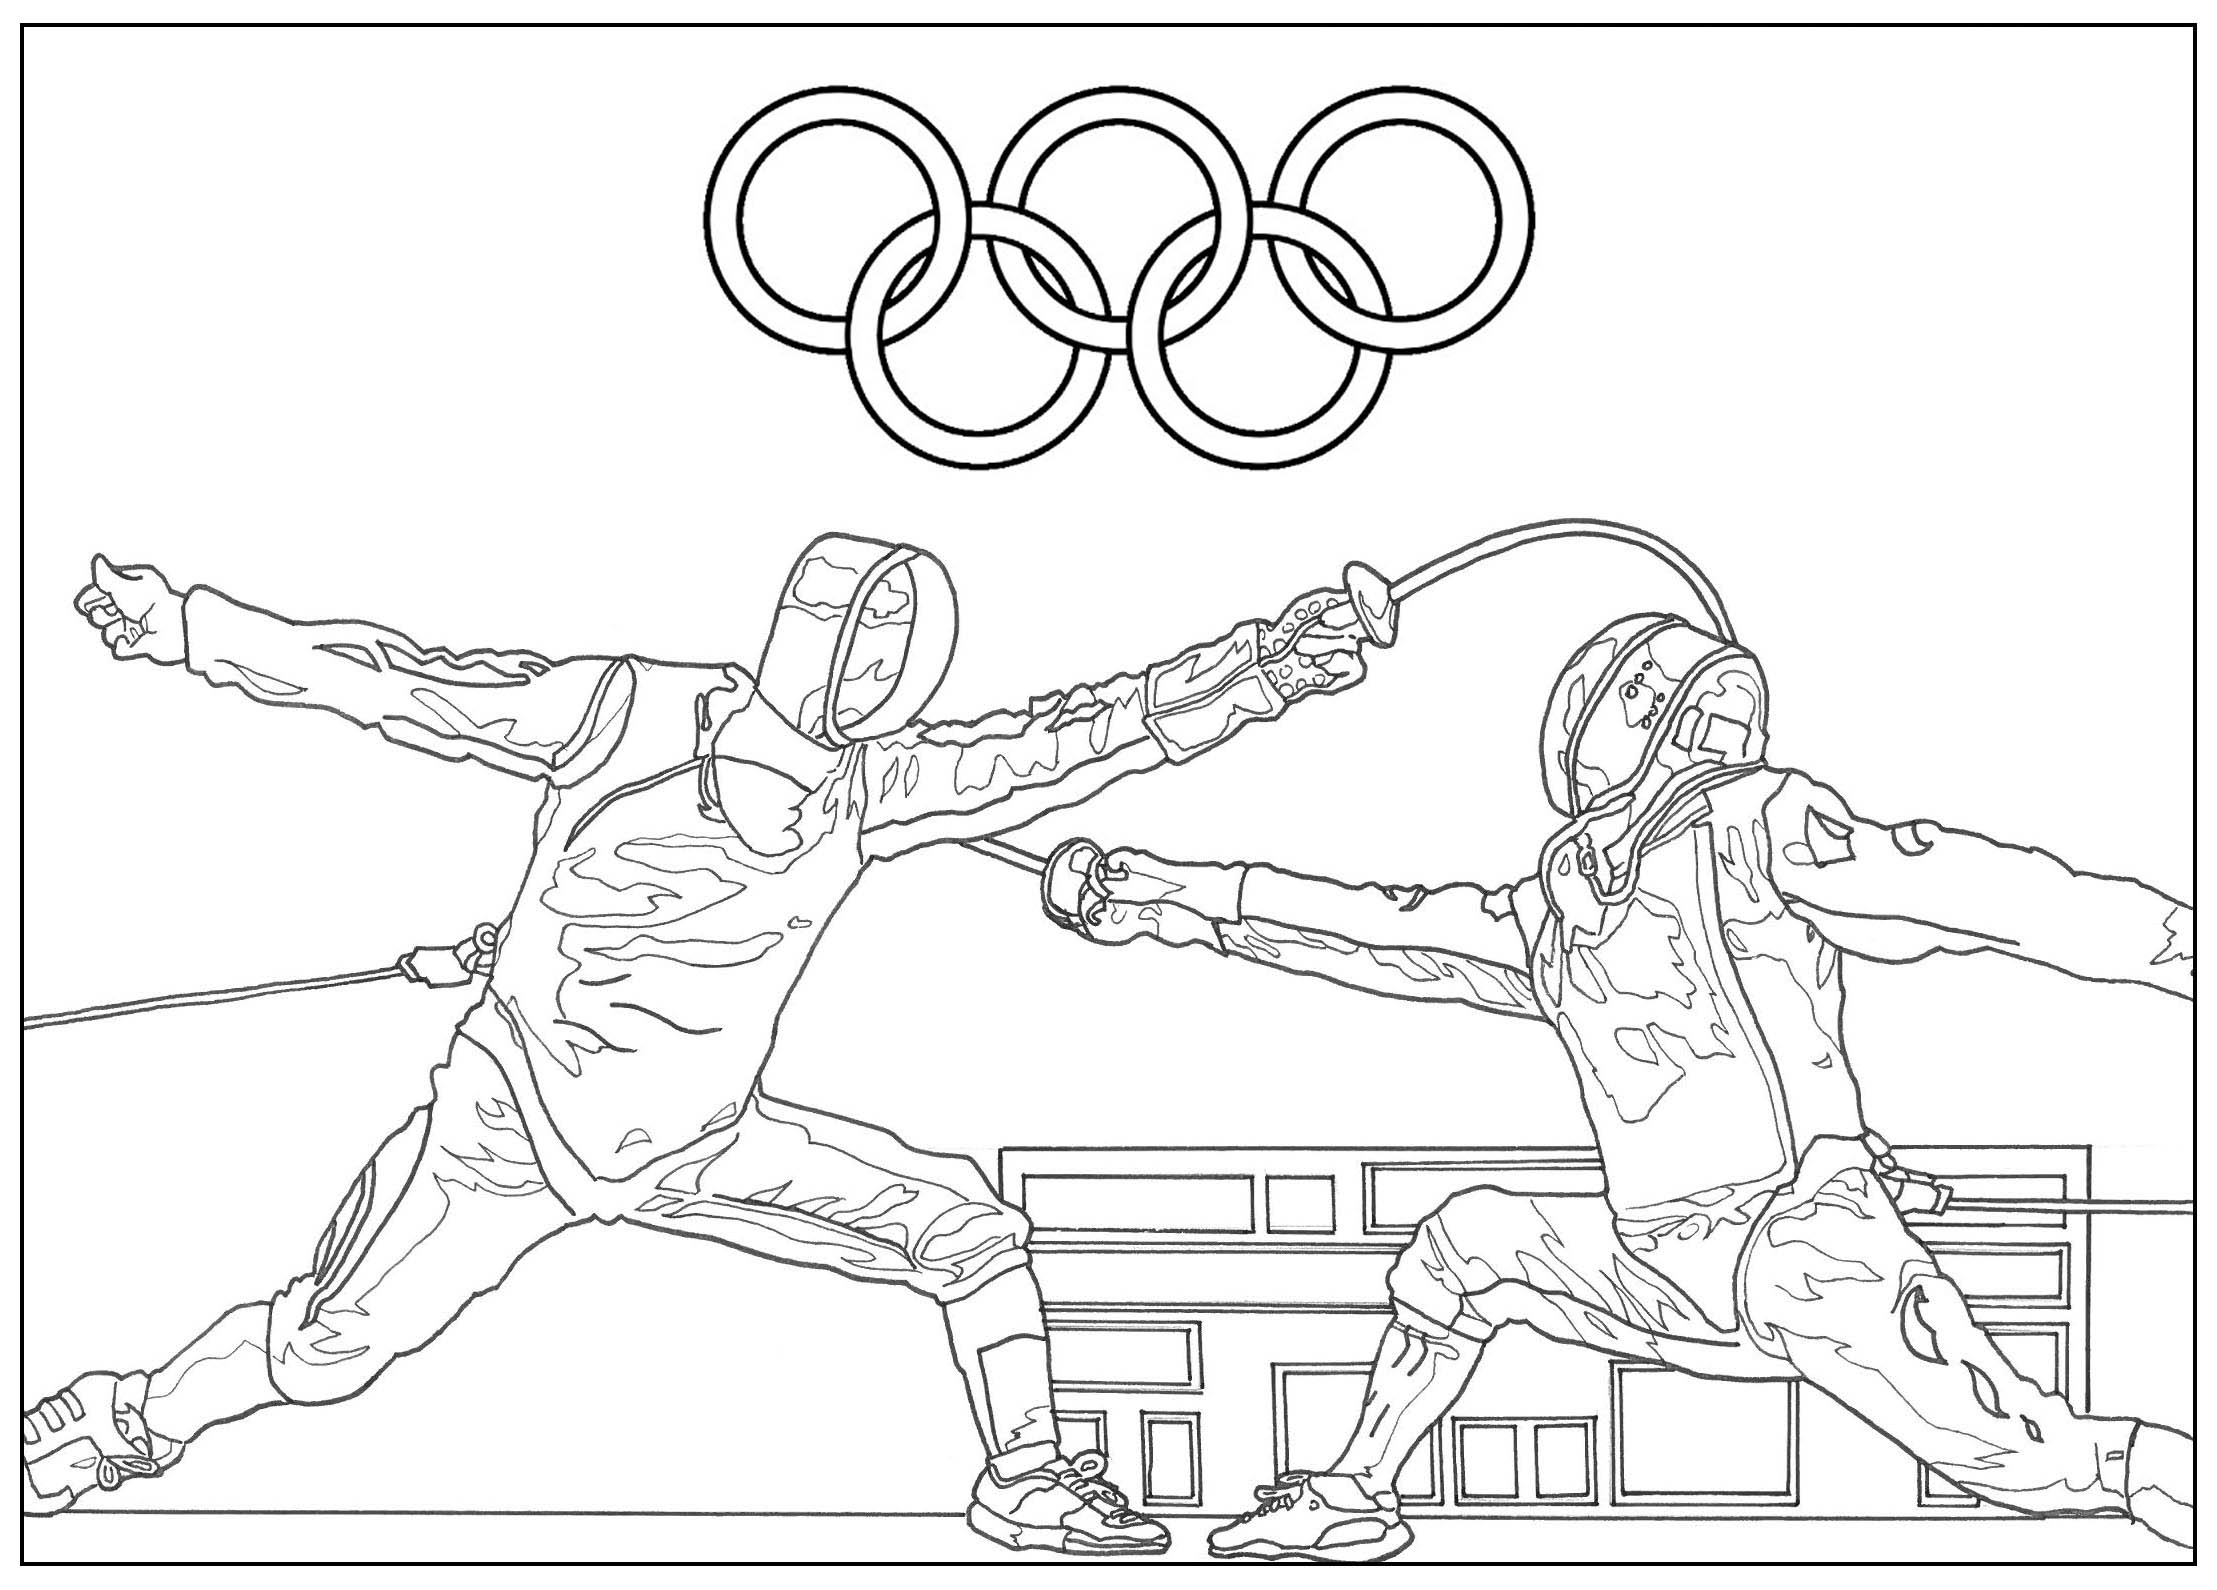 Simple Olympic Games coloring page to print and color for free